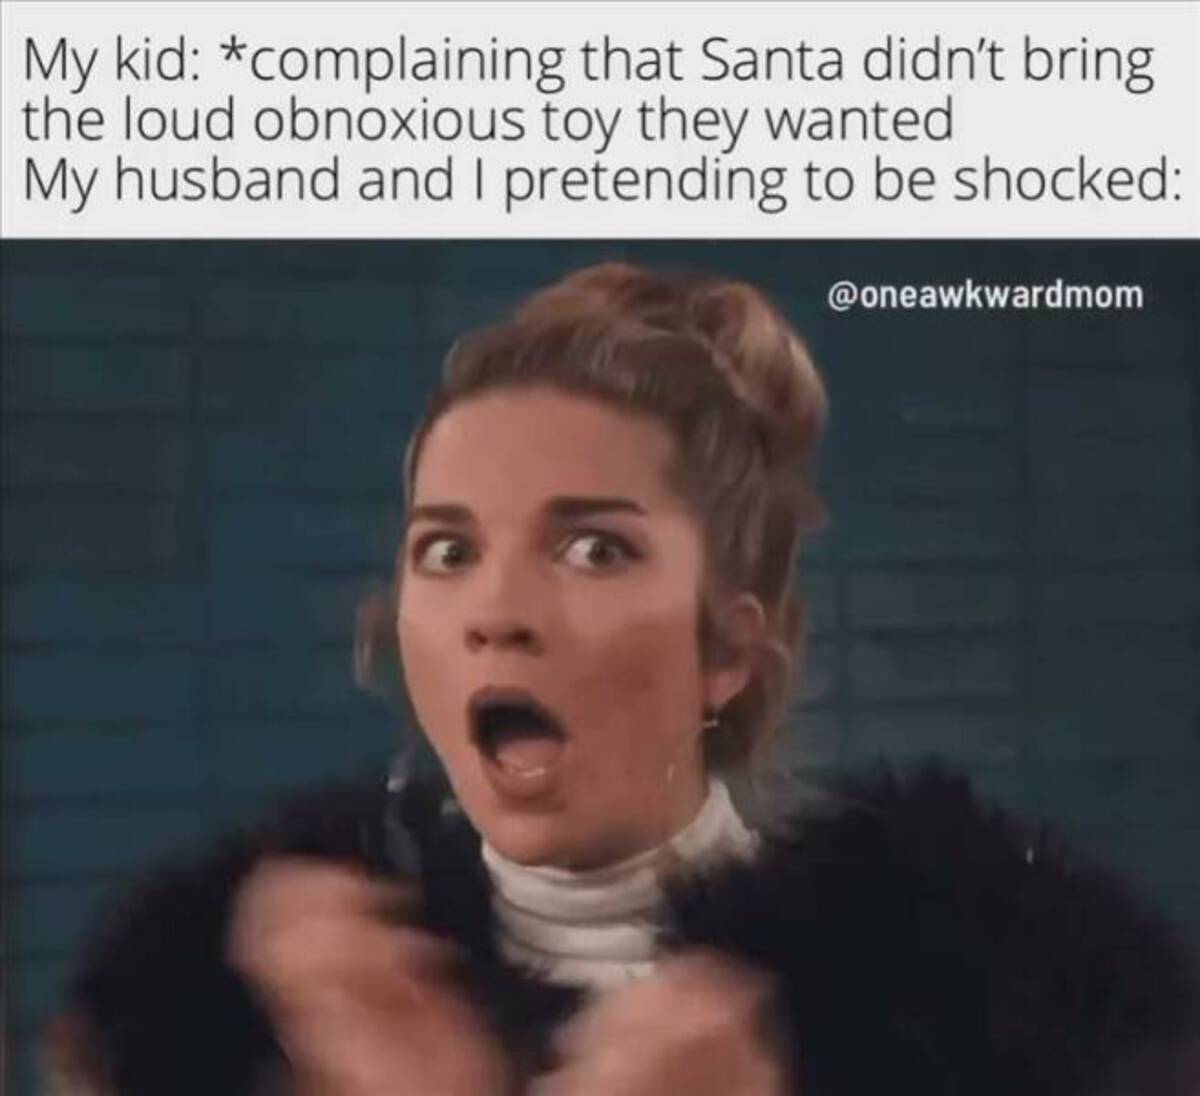 photo caption - My kid complaining that Santa didn't bring the loud obnoxious toy they wanted My husband and I pretending to be shocked